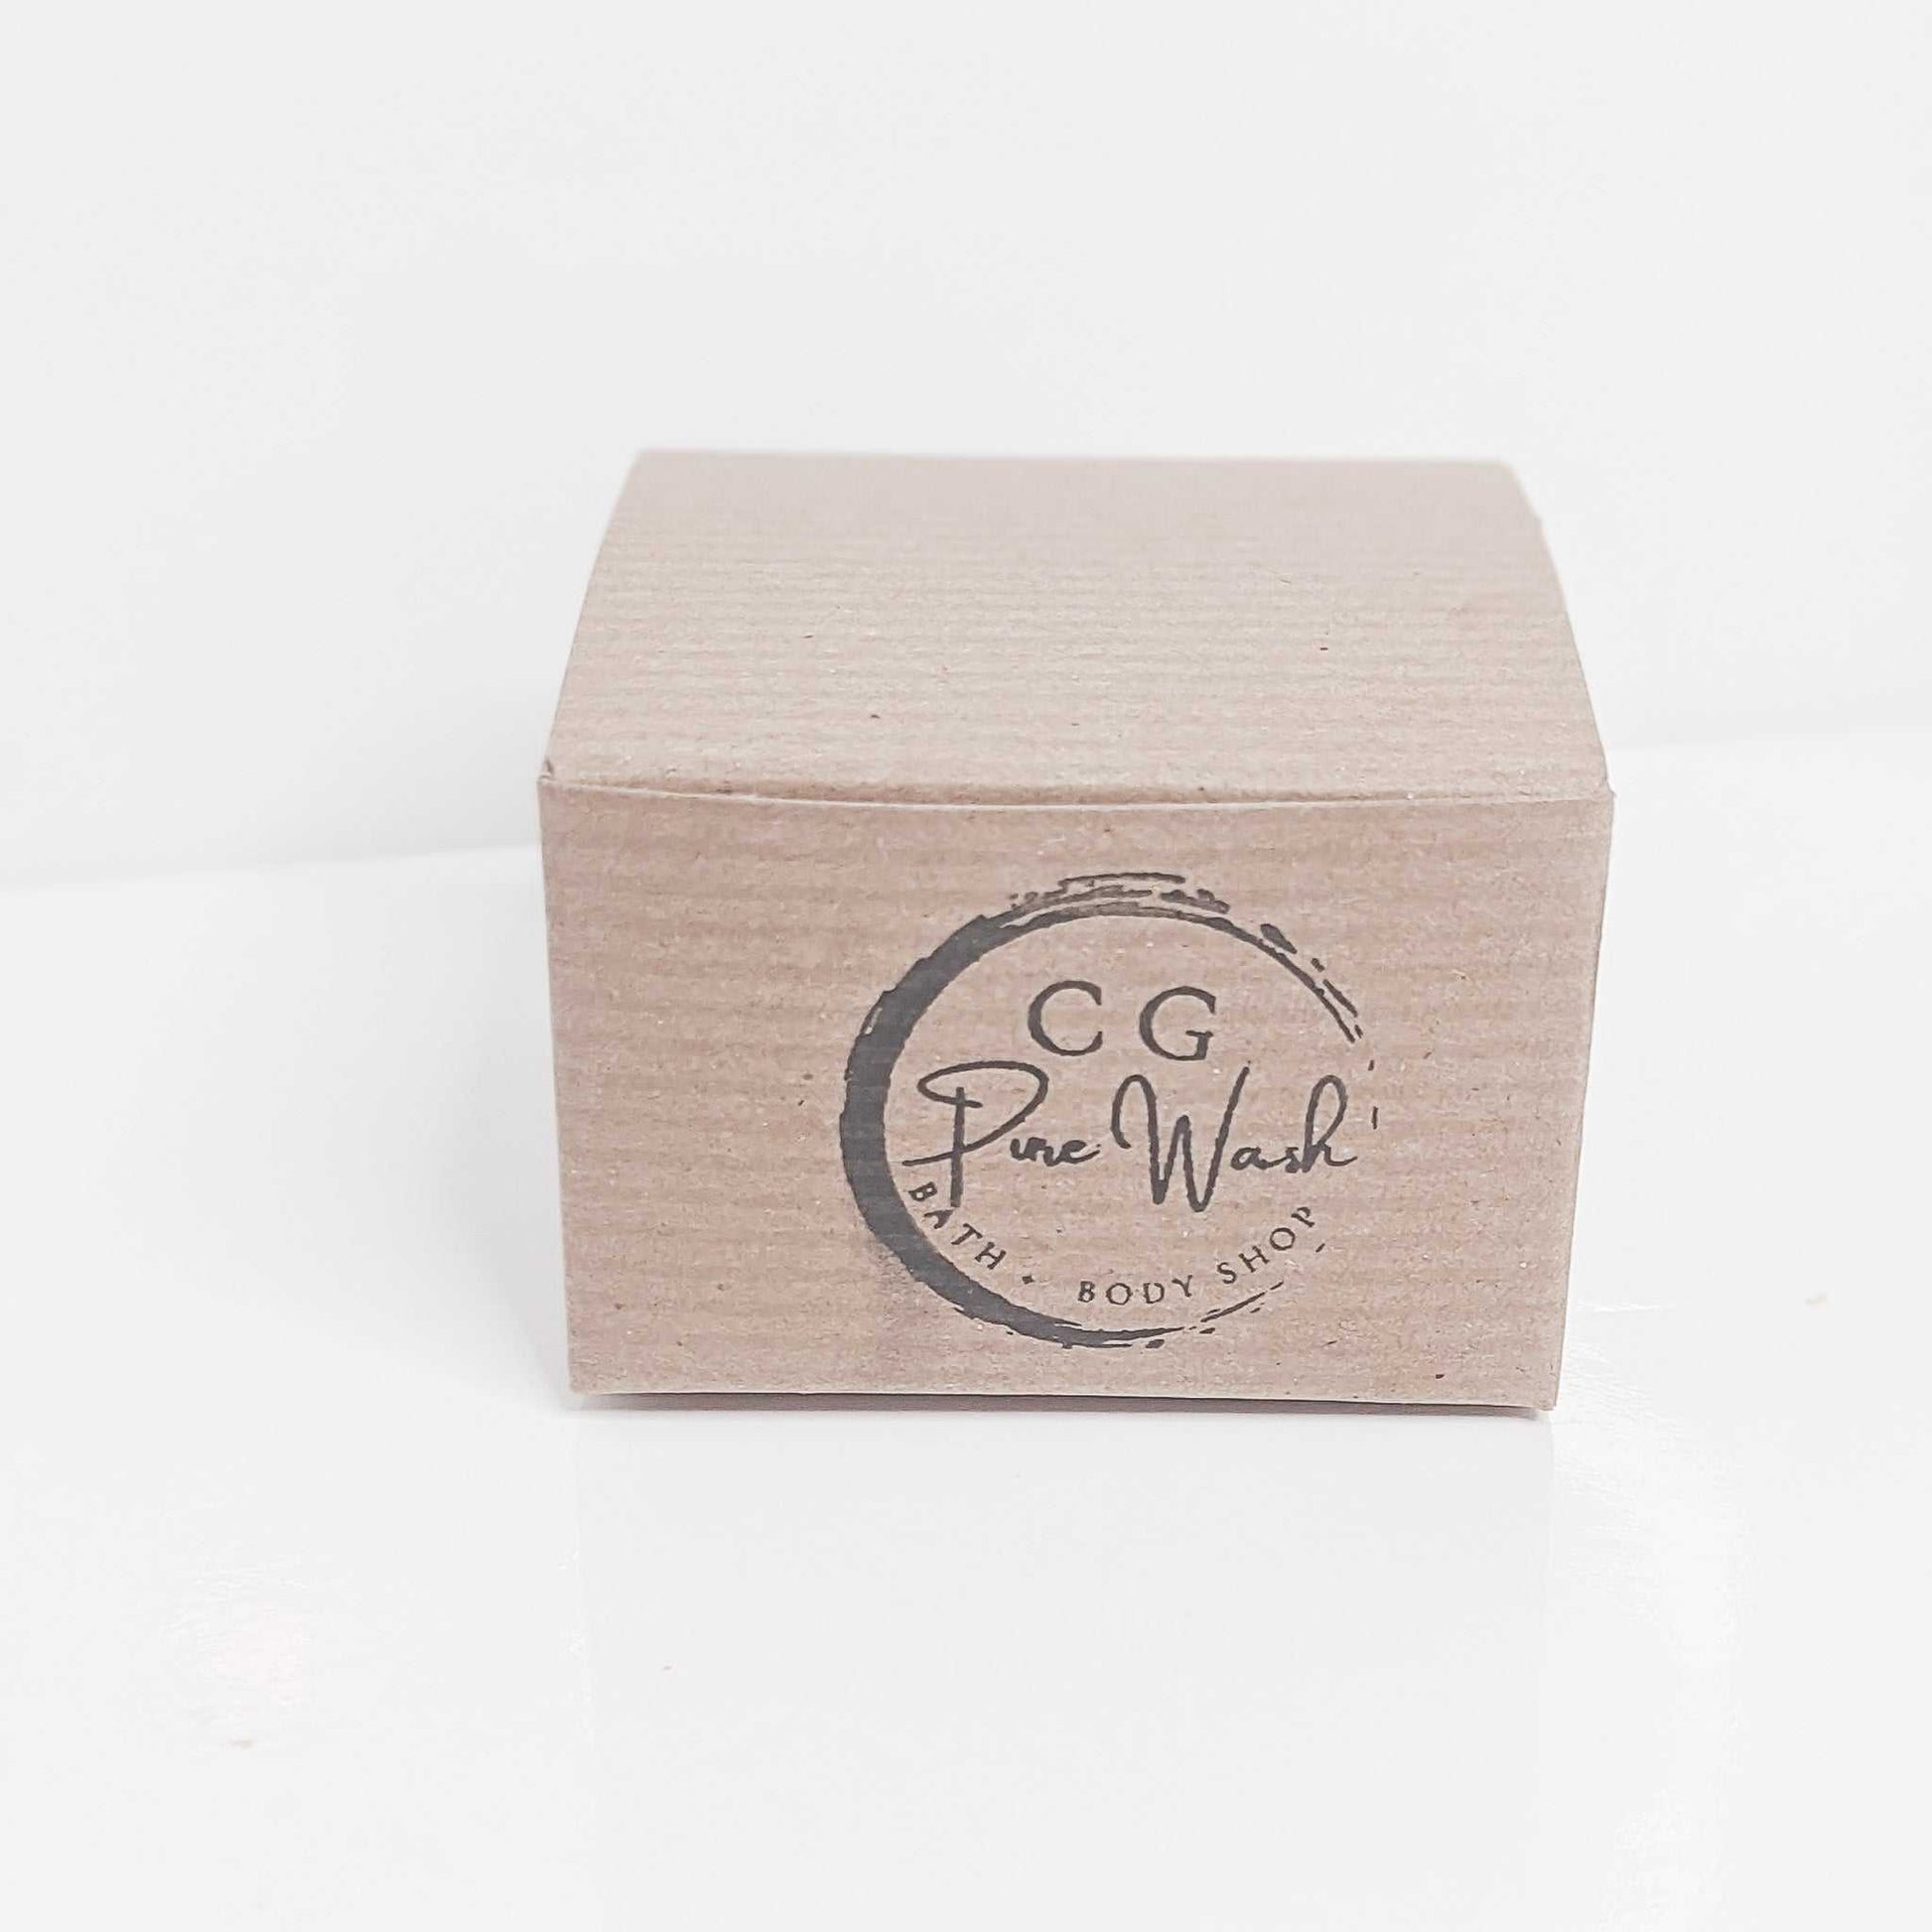 Mini Variety Box – [product_title] to the MAAsamples
Our bestseller is to help raise money for the MAA! 
The perfect way to discover our soaps and support the MAA at the same time.
We donate [product_description] to Manitoba Animal Allimini variety box –soap sample boxCG Pure Wash